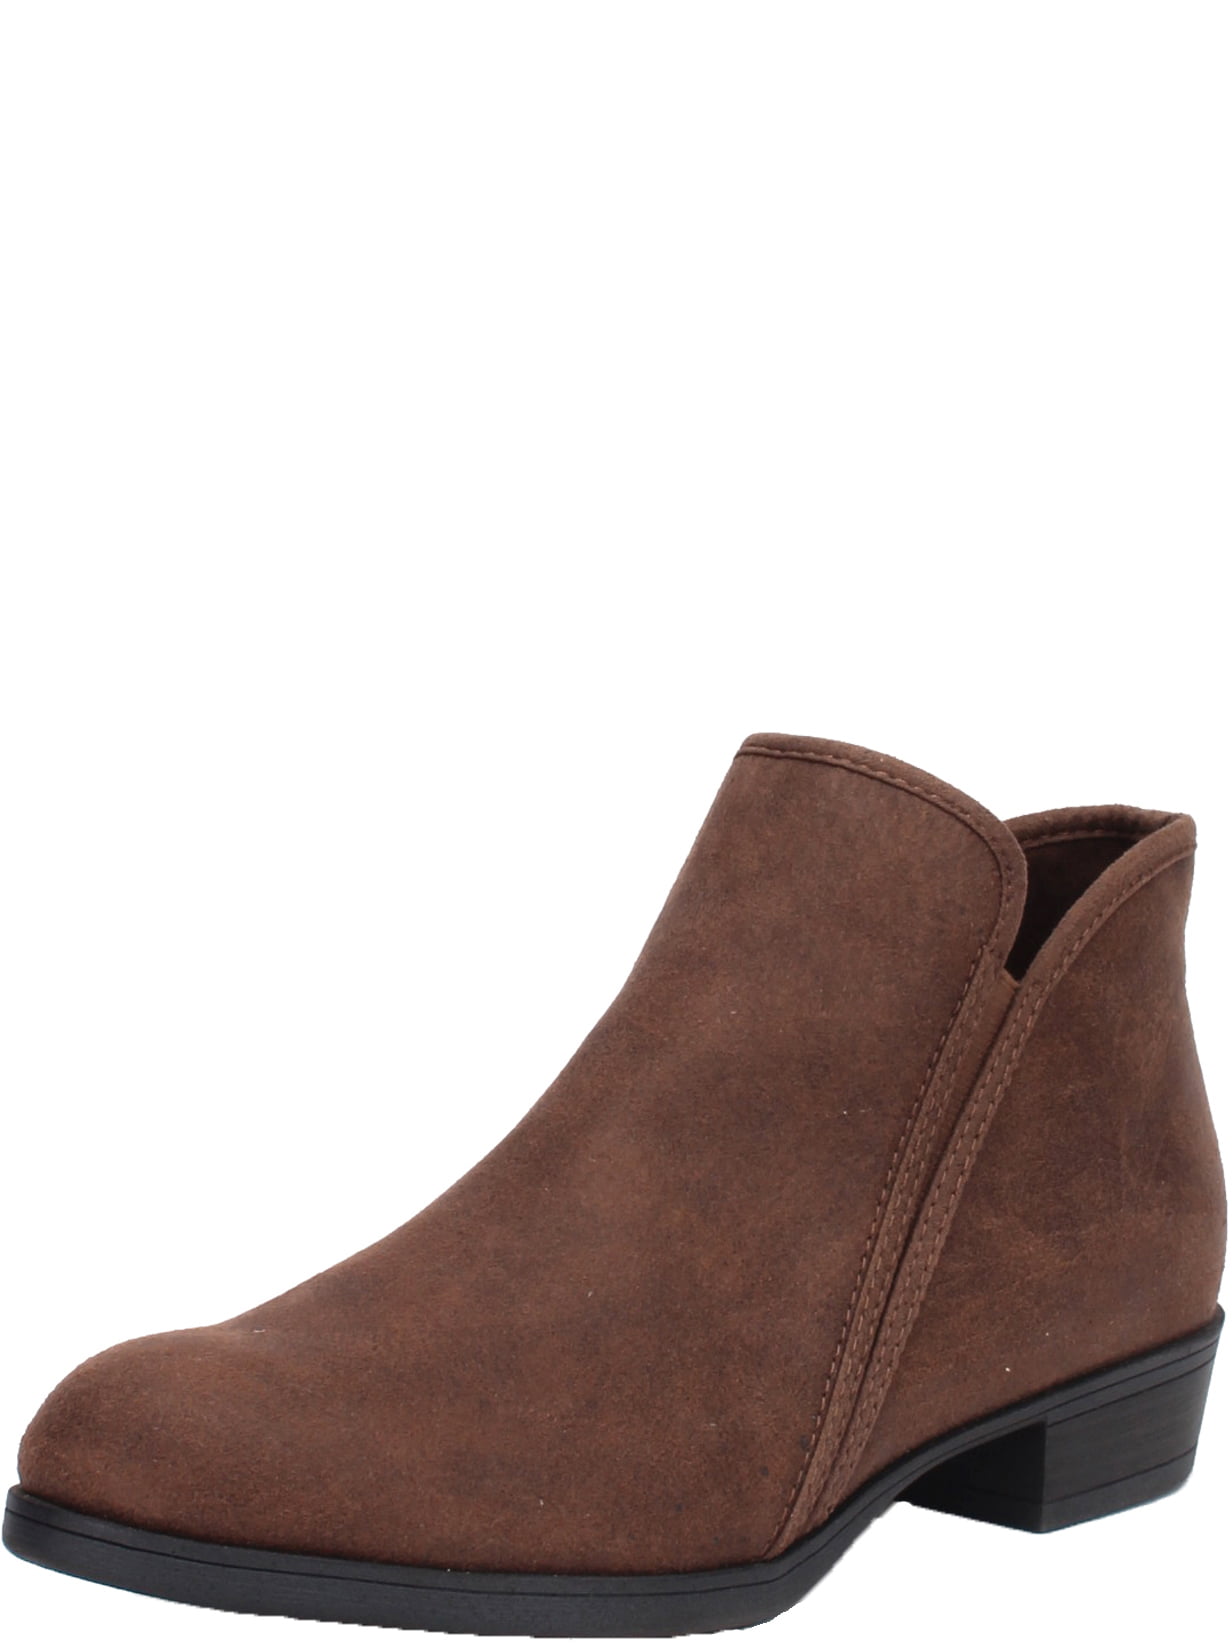 Women's Time and Tru Bootie 